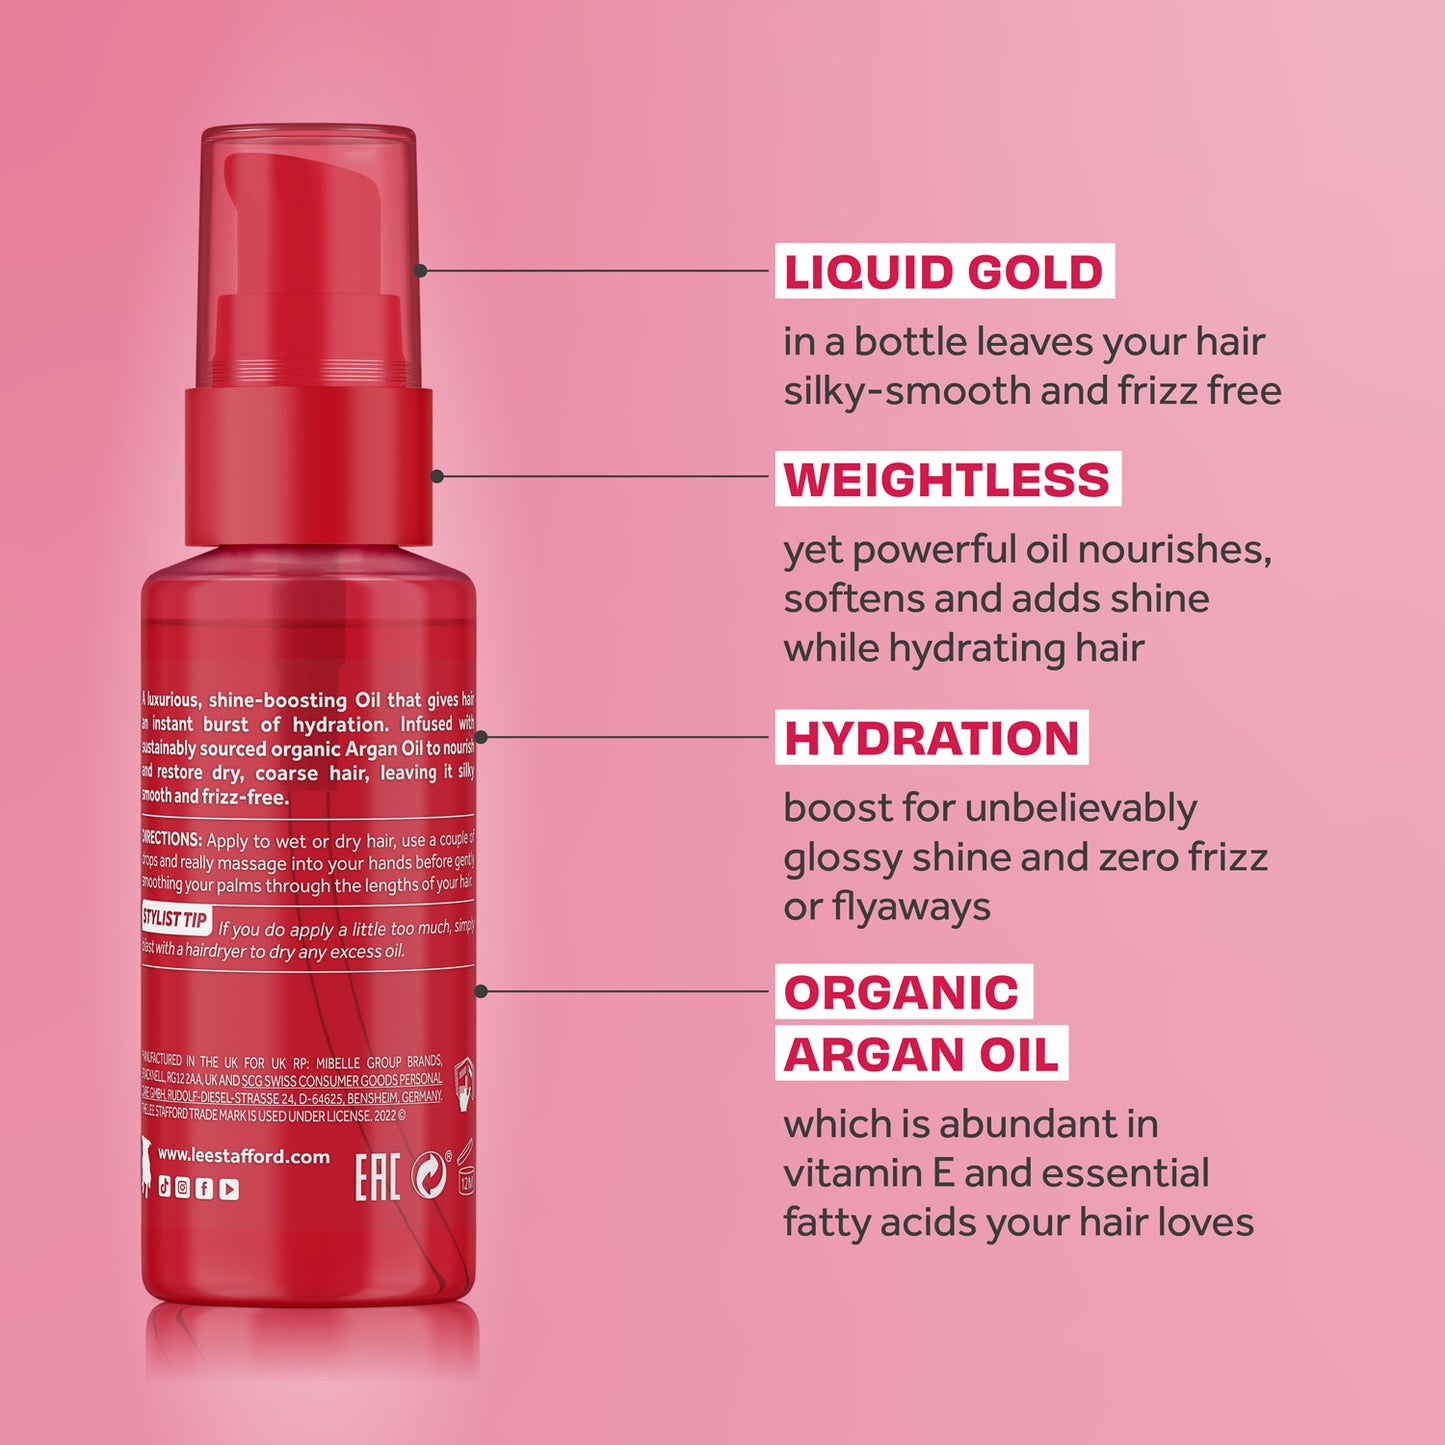 Argan Oil from Morocco Nourishing Miracle Oil